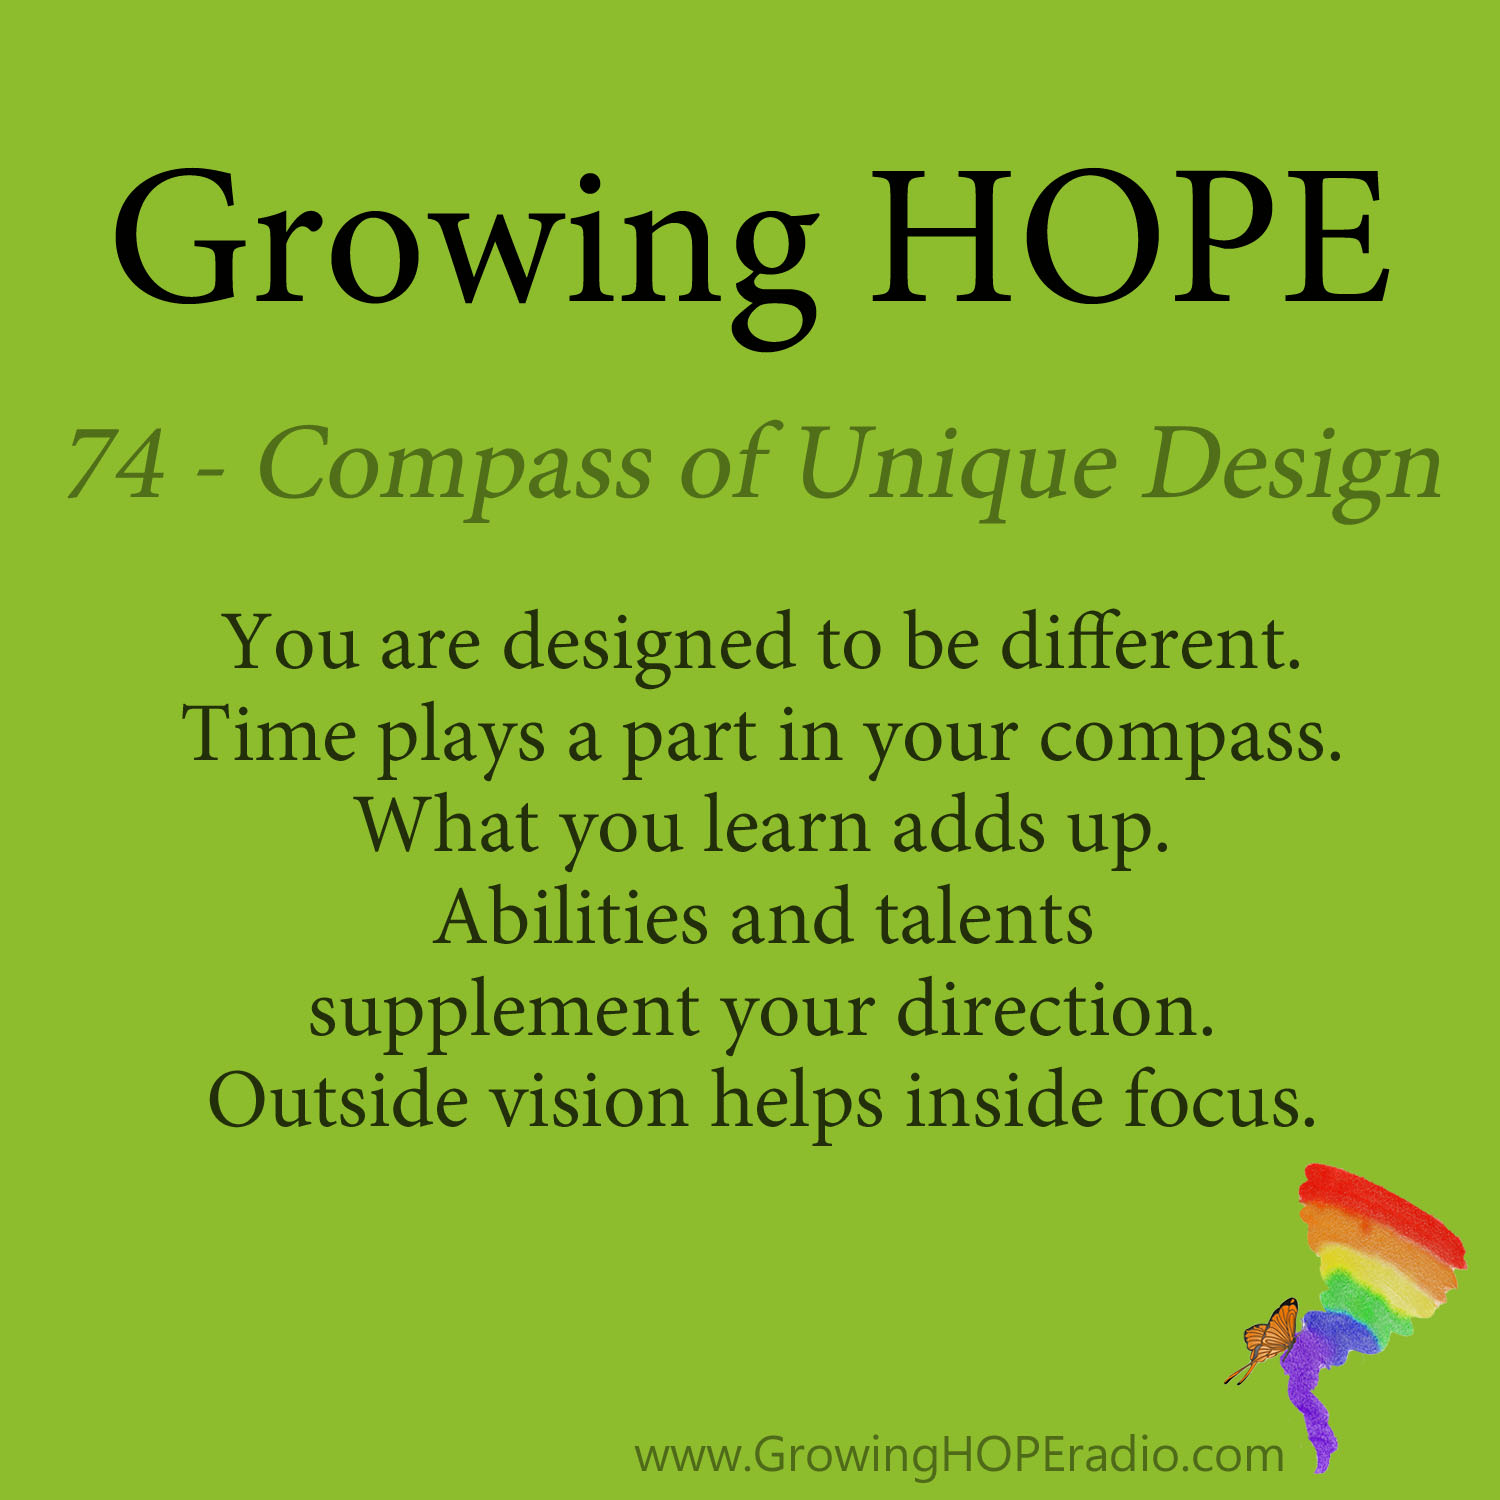 Growing HOPE Daily - 5 Points - compass of unique design